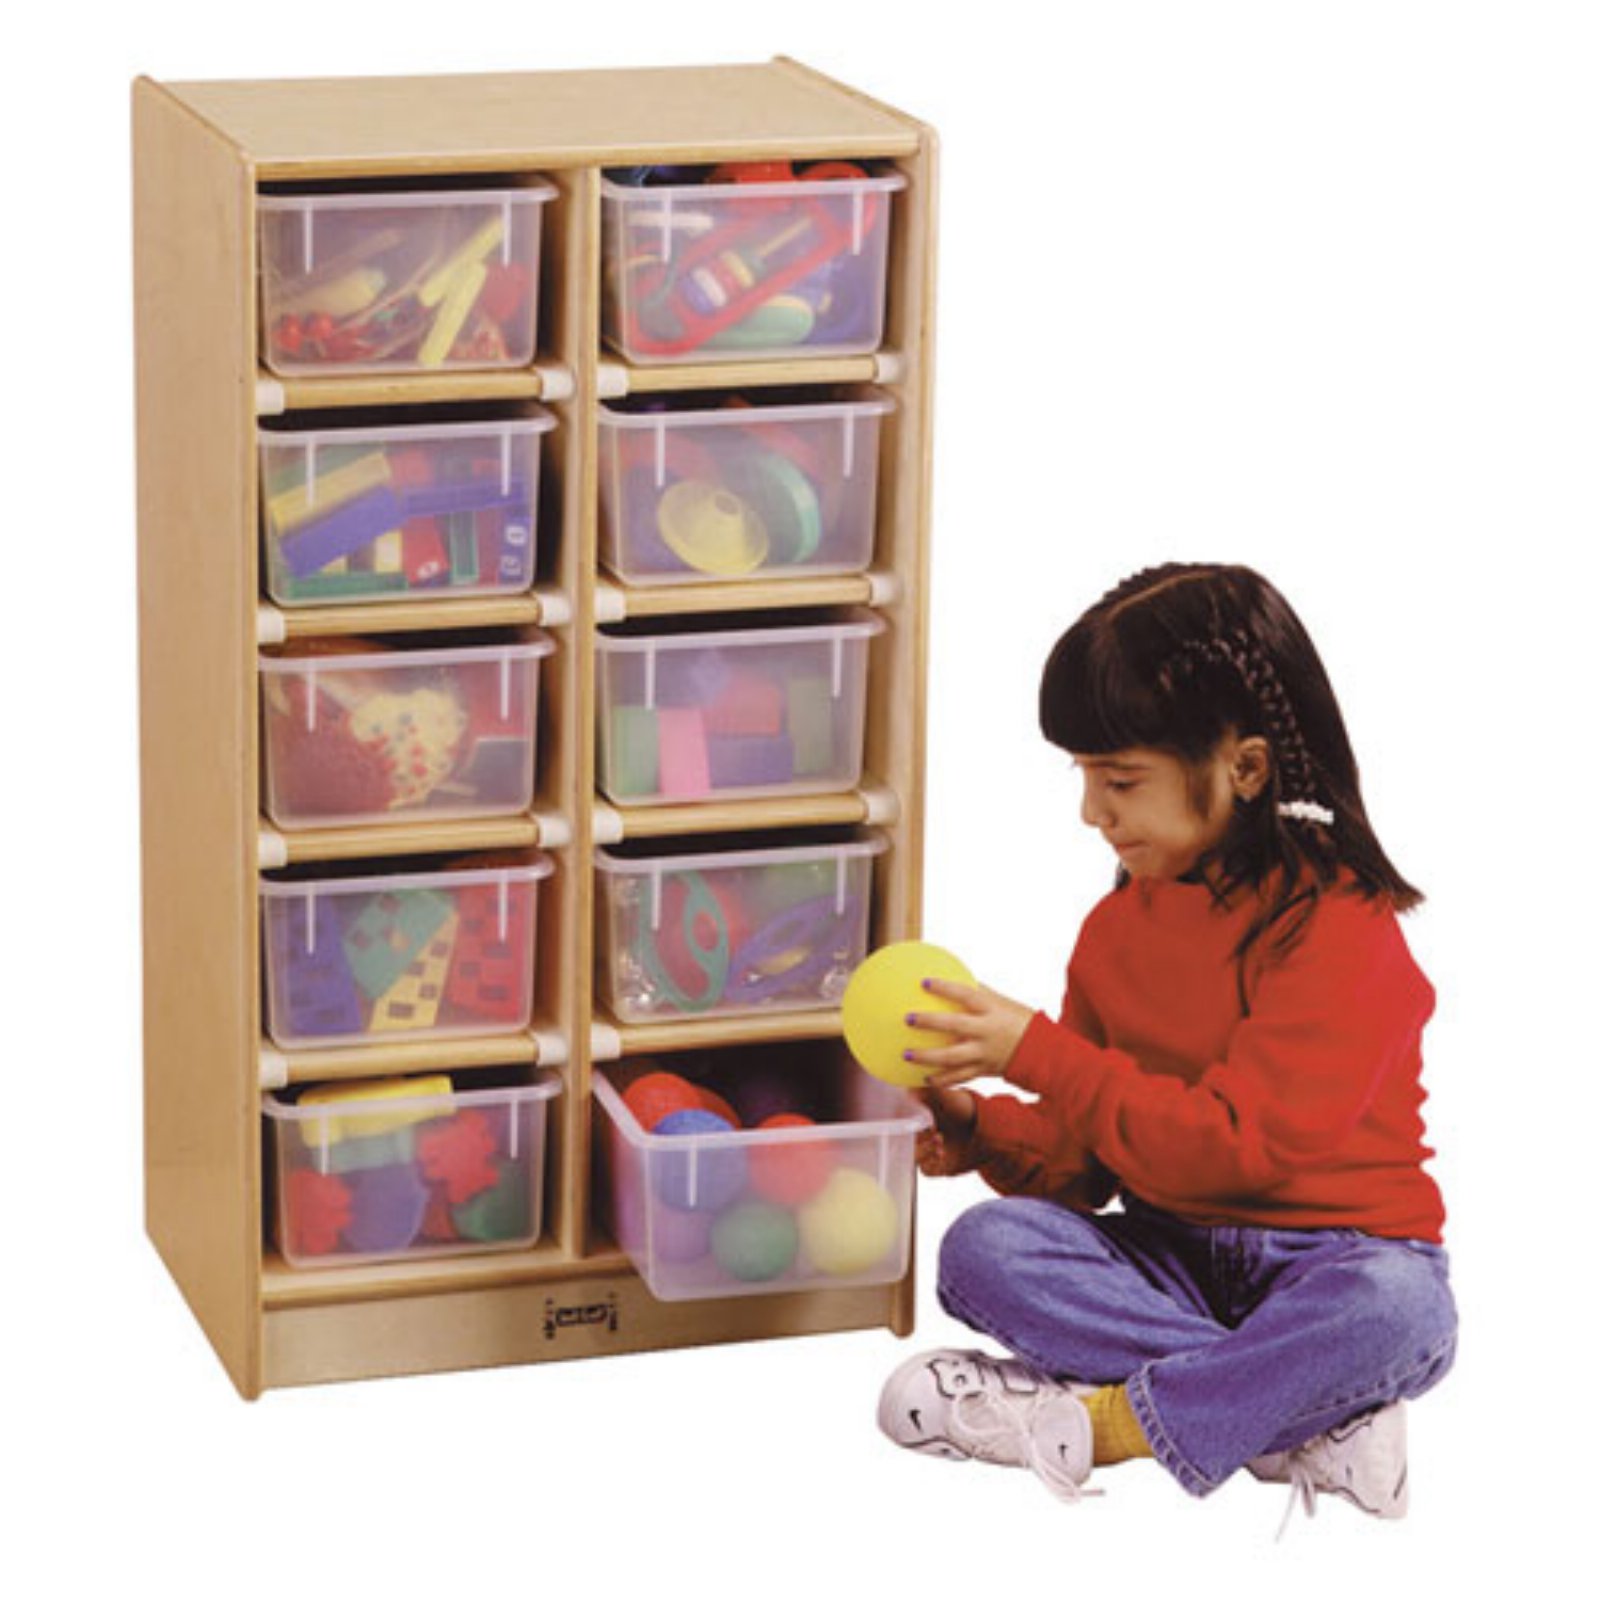 Kydz 10 Tray Mobile Storage Cubbie - image 1 of 3